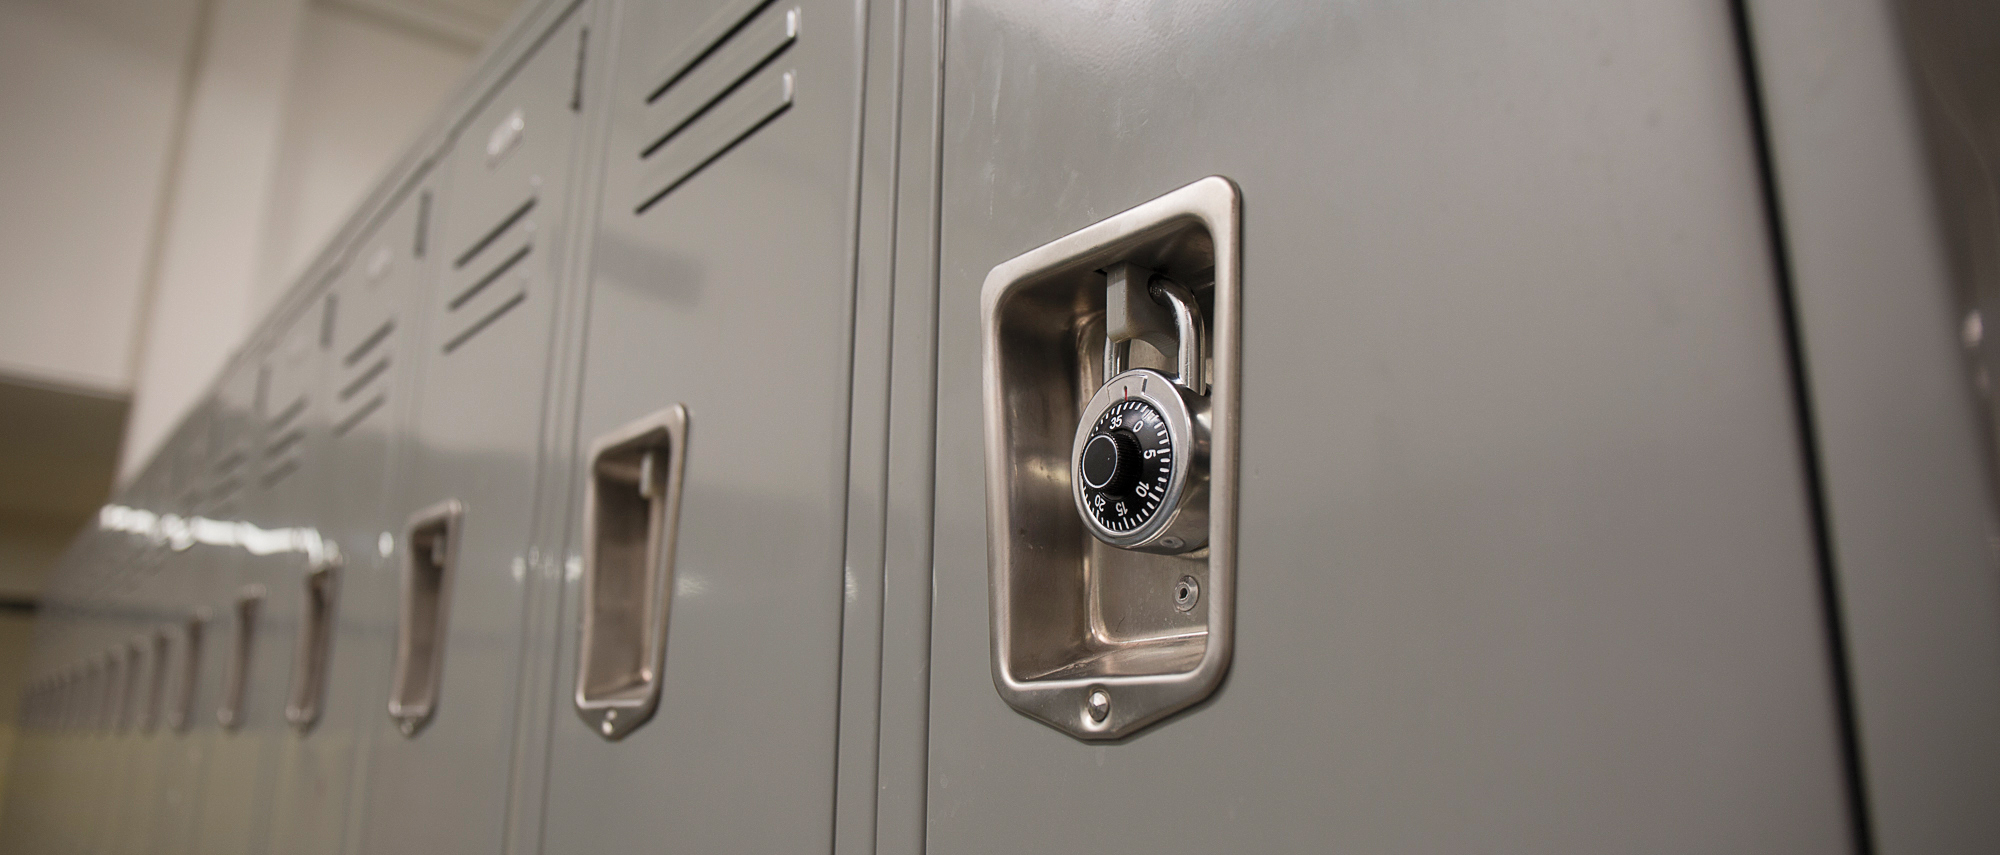 Gym lockers continue to be burglarized despite lower crime rate